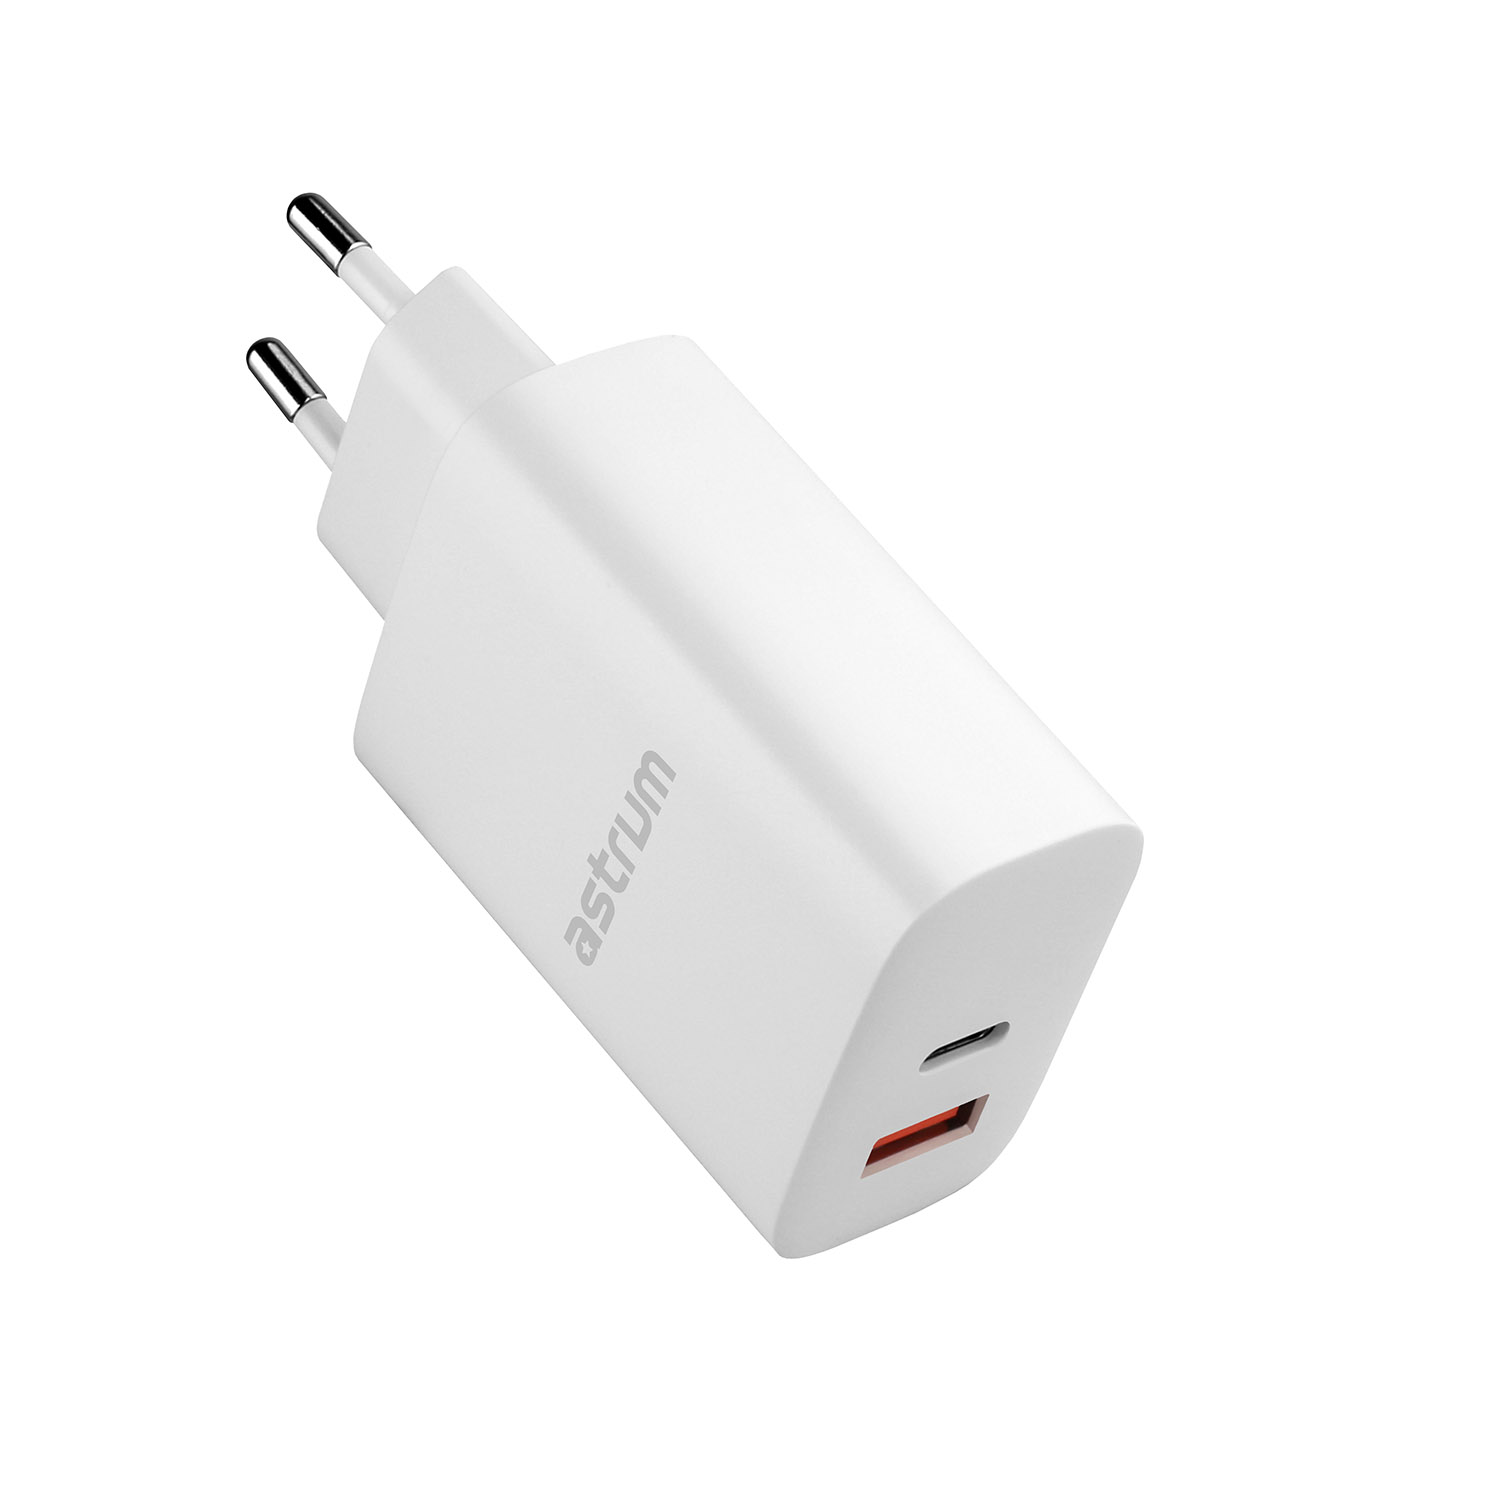 Pro Dual PD65 PD65W Dual USB Travel Wall Charger